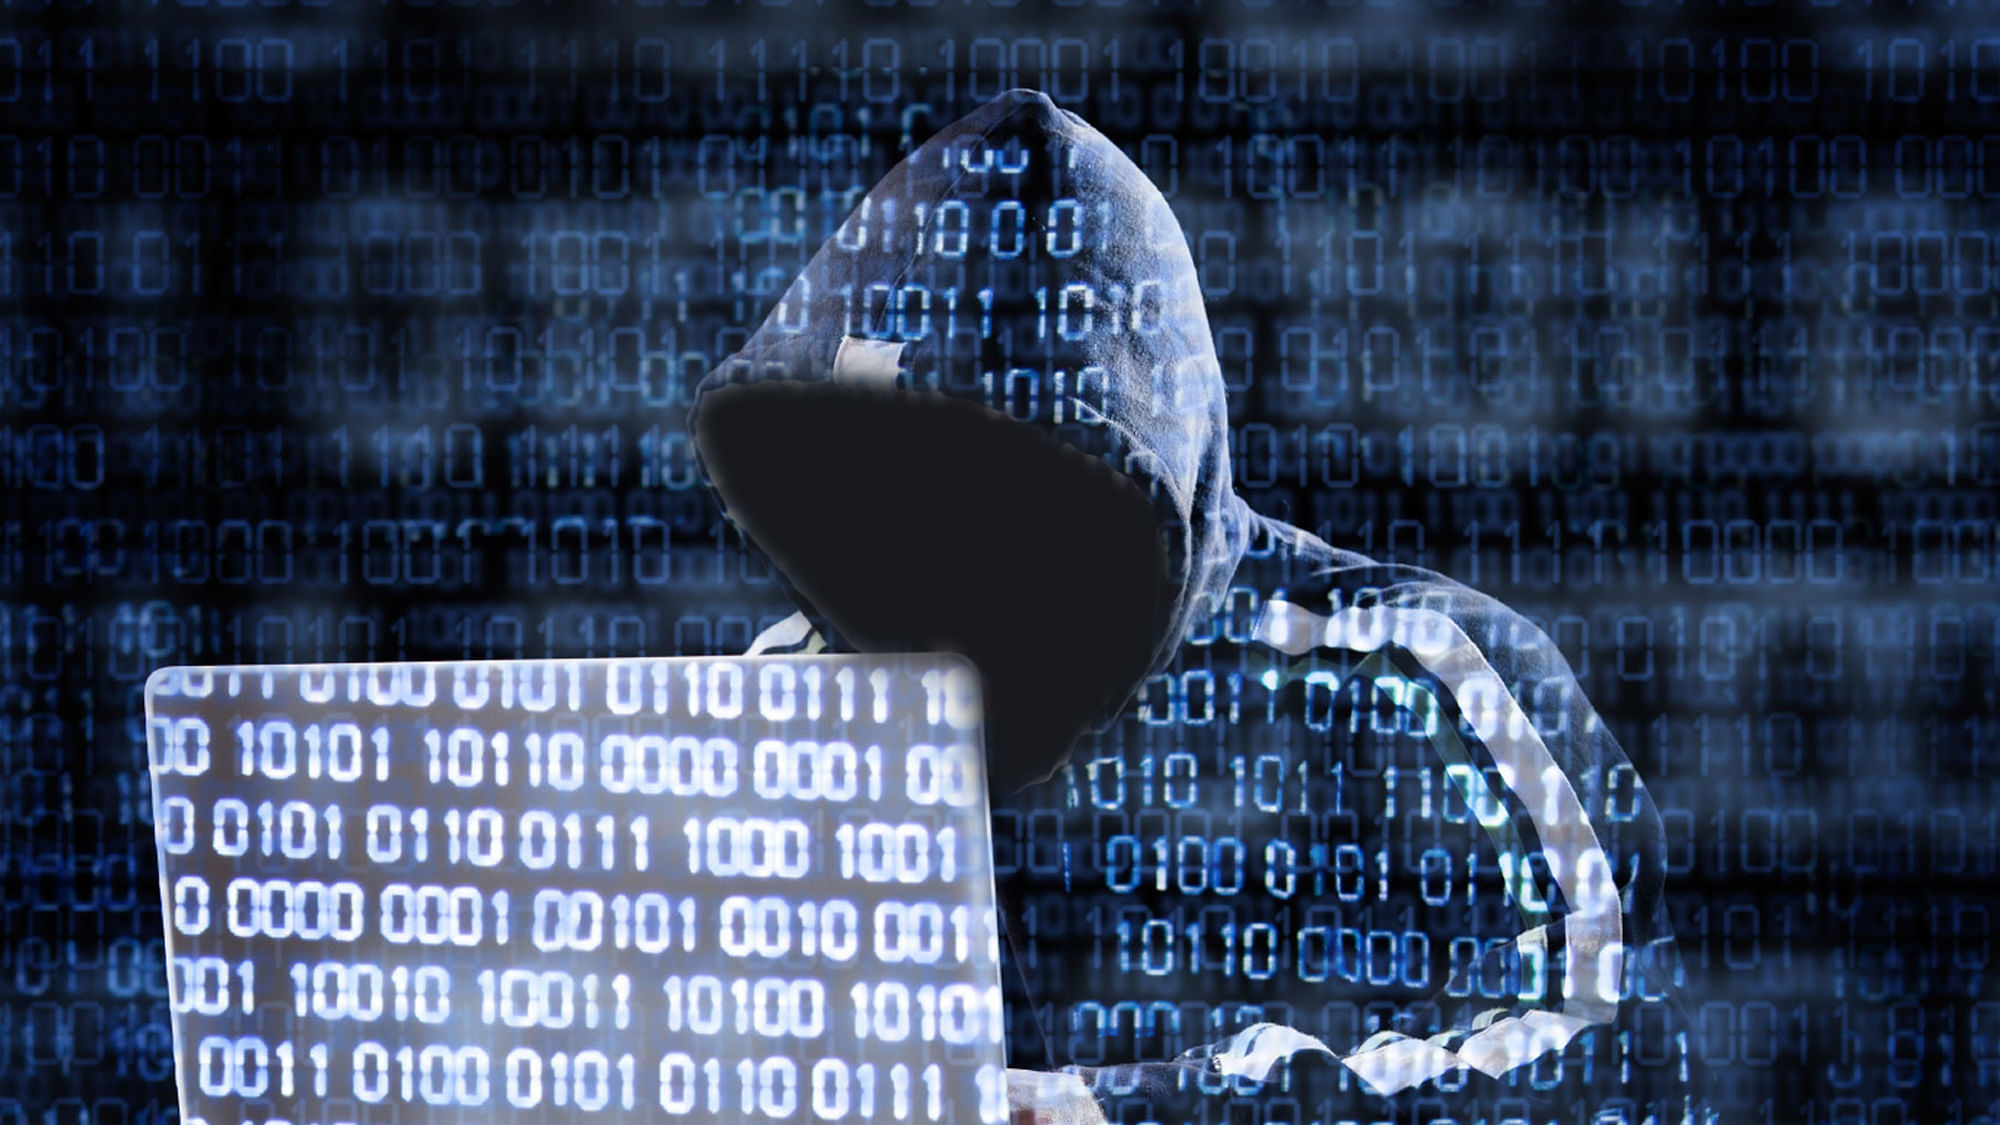 India is 4th on the most vulnerable nations against cyber threats. (Photo: iStockphoto)